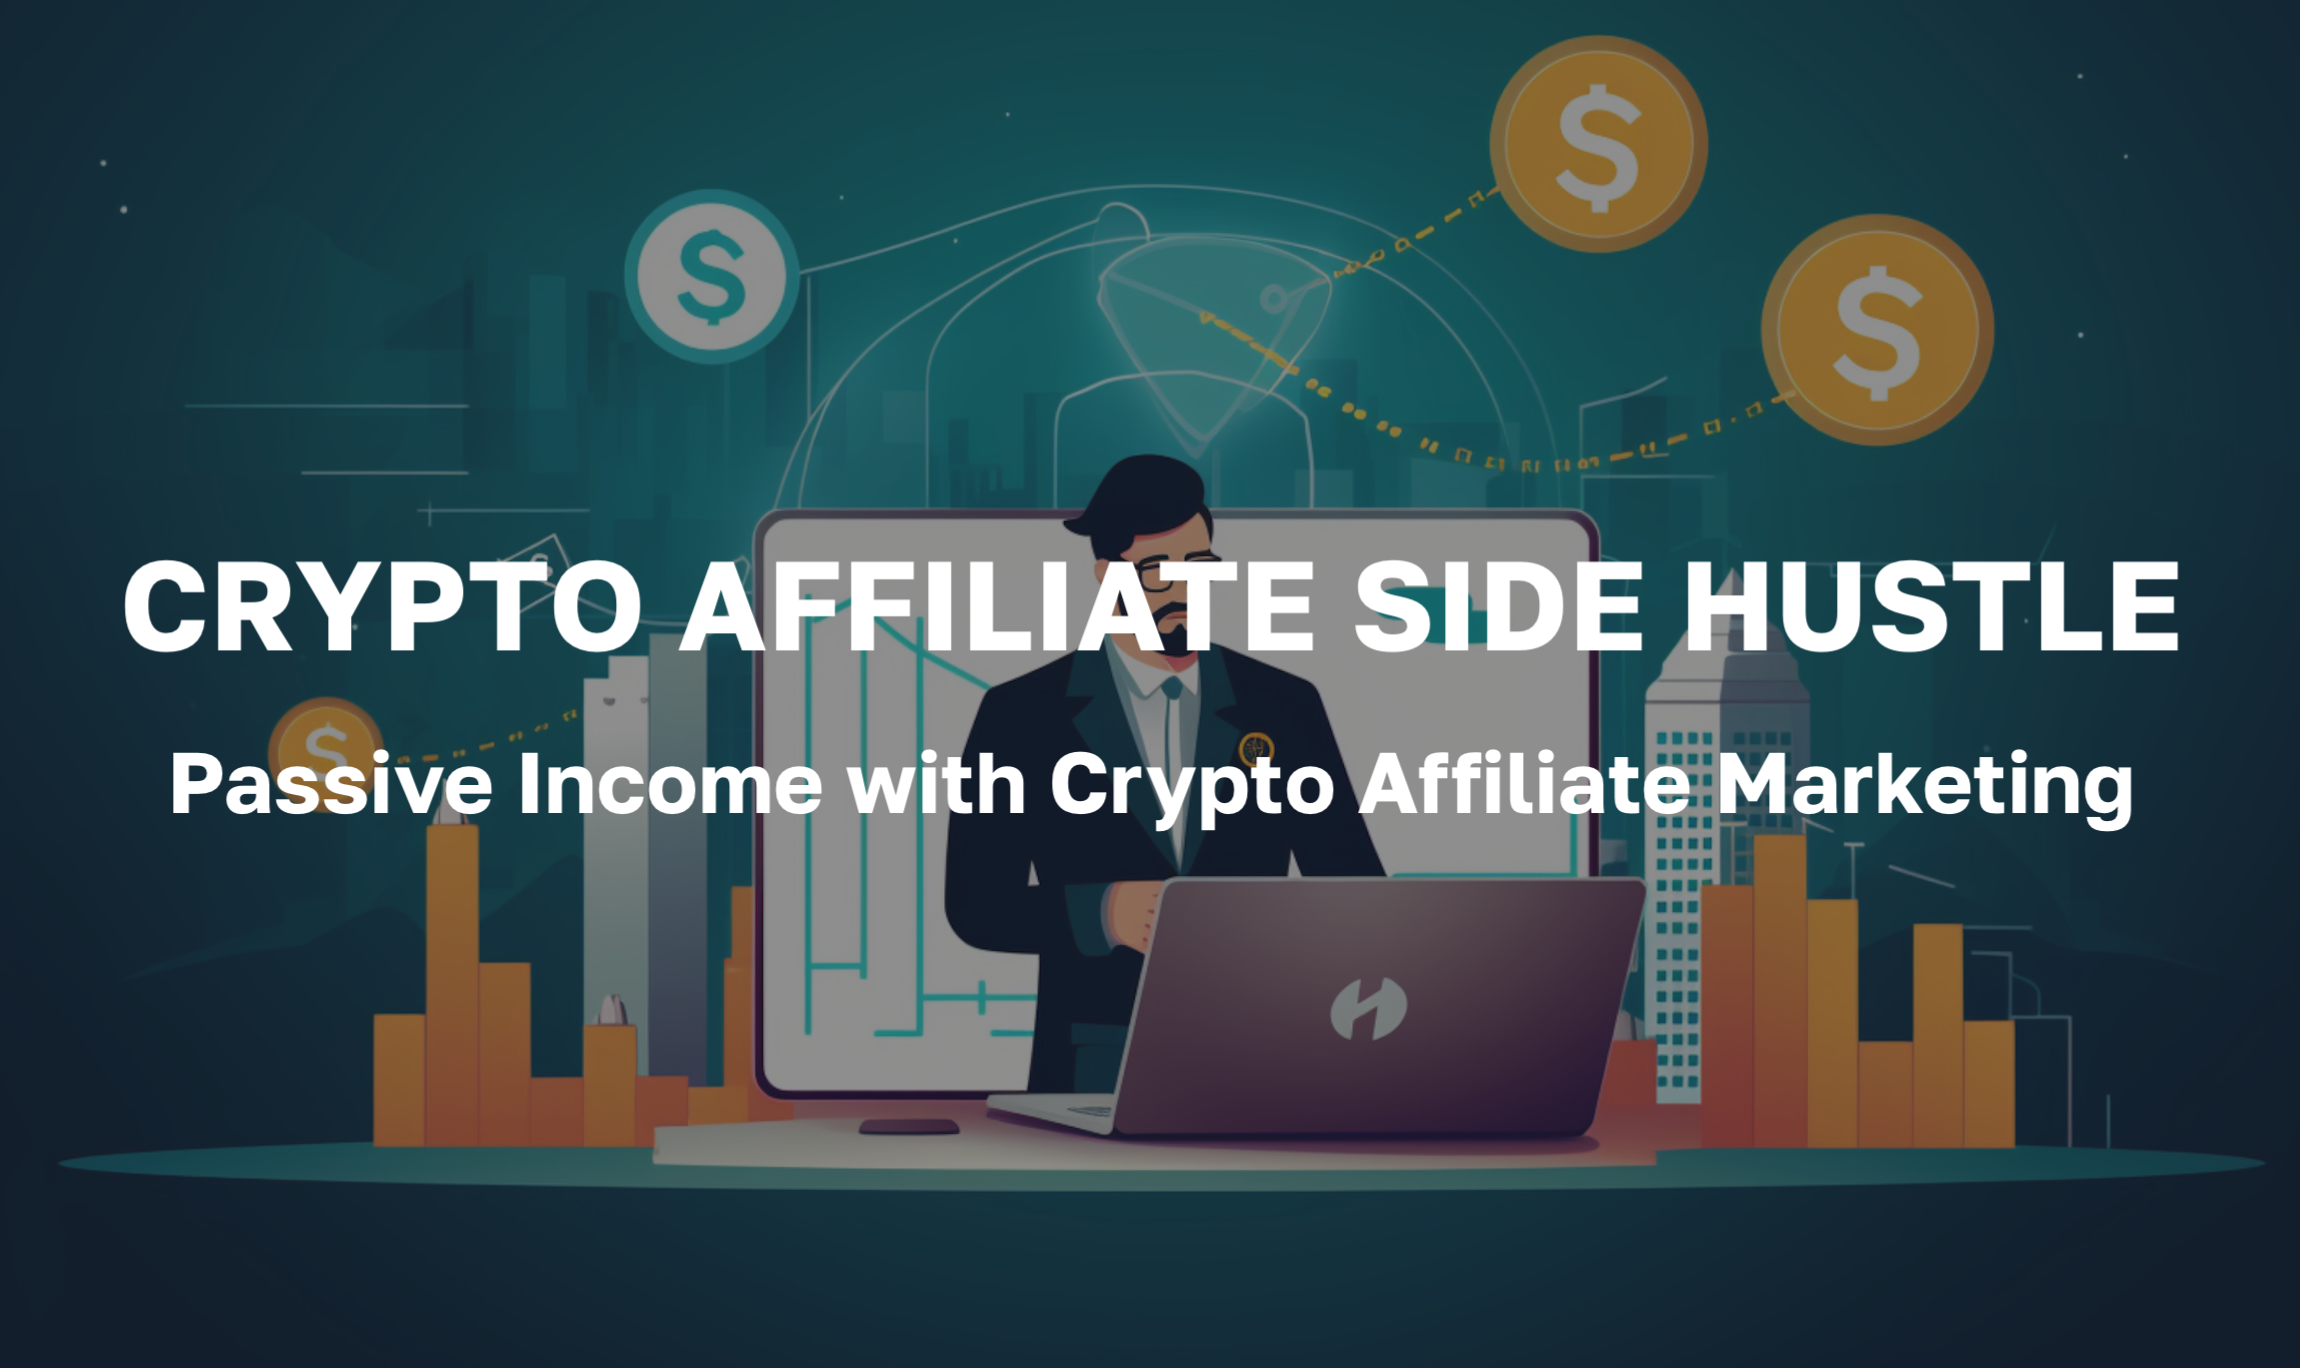 Earn Passive Income with a Crypto Affiliate Marketing Side Hustle